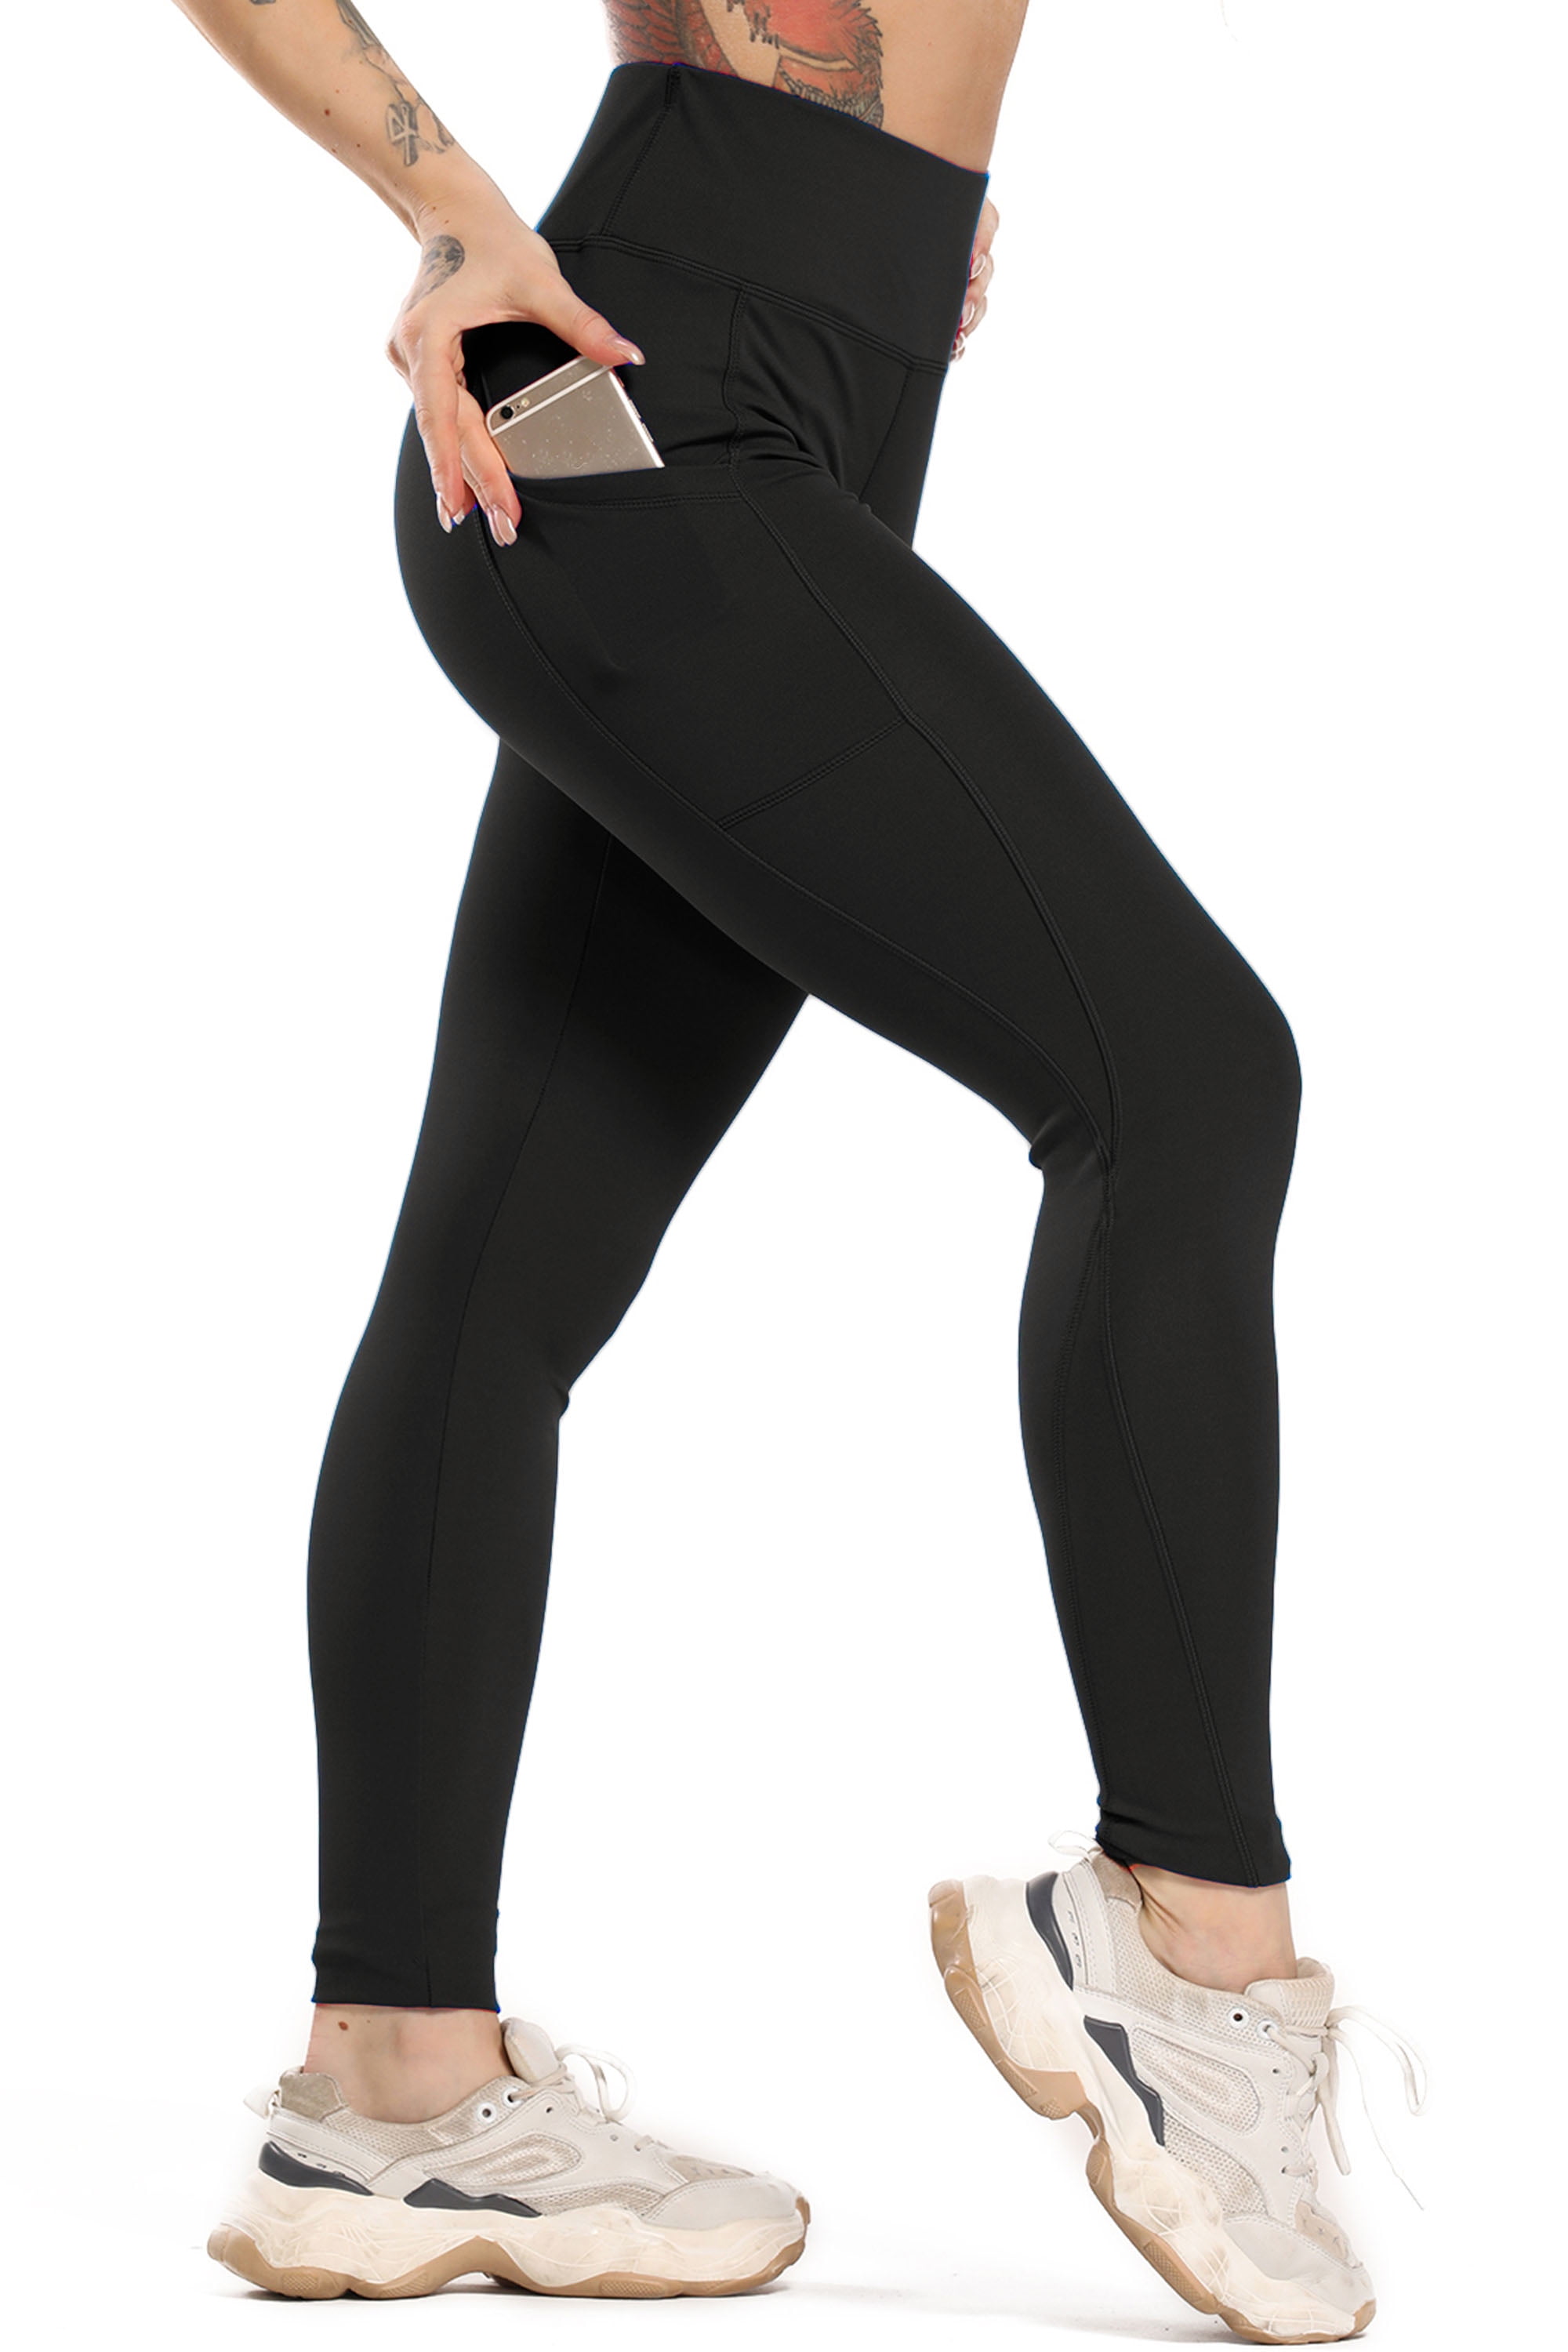 4 Way Stretch Yoga Leggings Womens High Waisted Yoga Pants Wish Pockets,Tummy Control，Workout Sports Running Athletic Pants